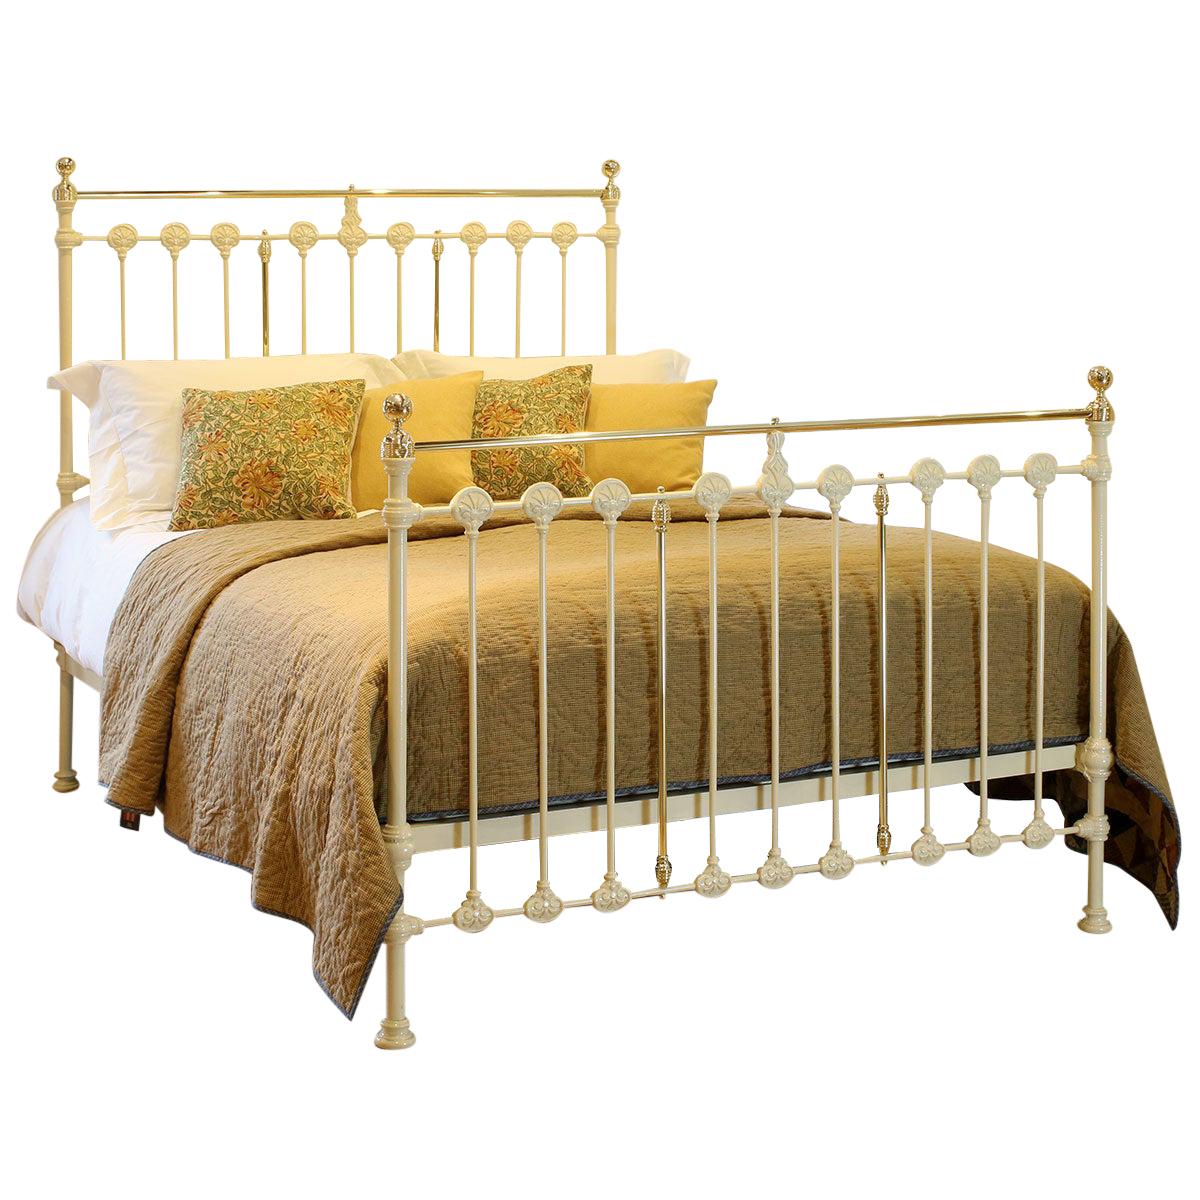 Brass and Iron Antique Bed in Cream MK214